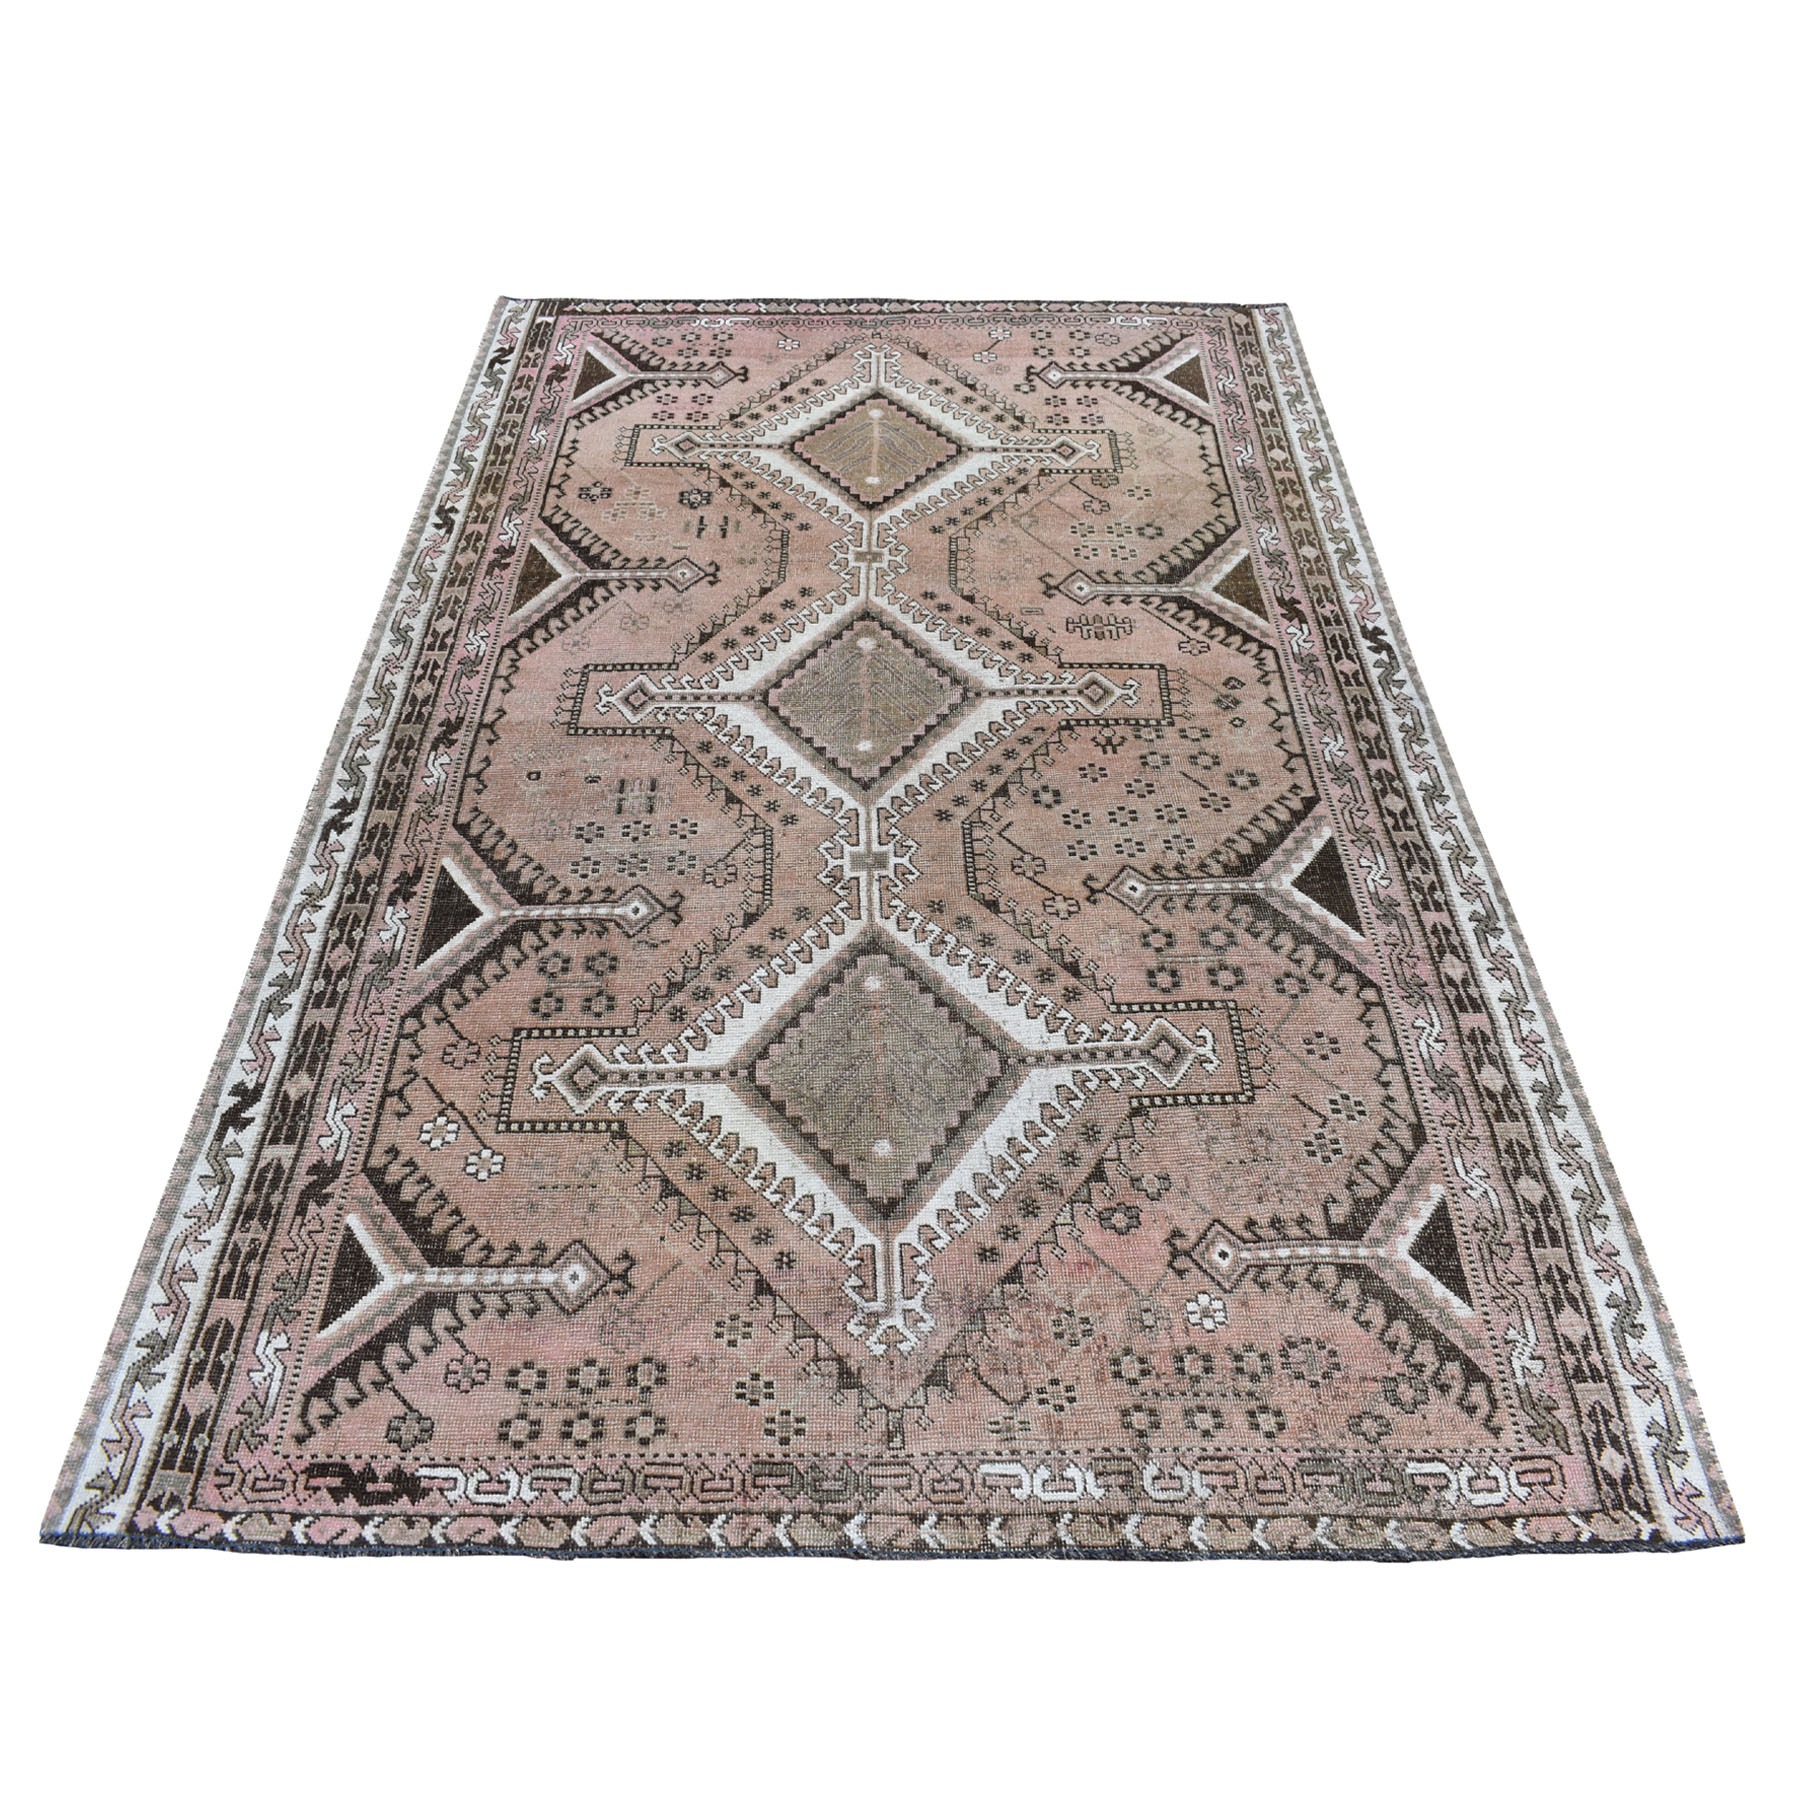 4'9"X7'7" Vintage And Worn Down Distressed Colors Persian Shiraz Hand Knotted Bohemian Rug moaed0d9